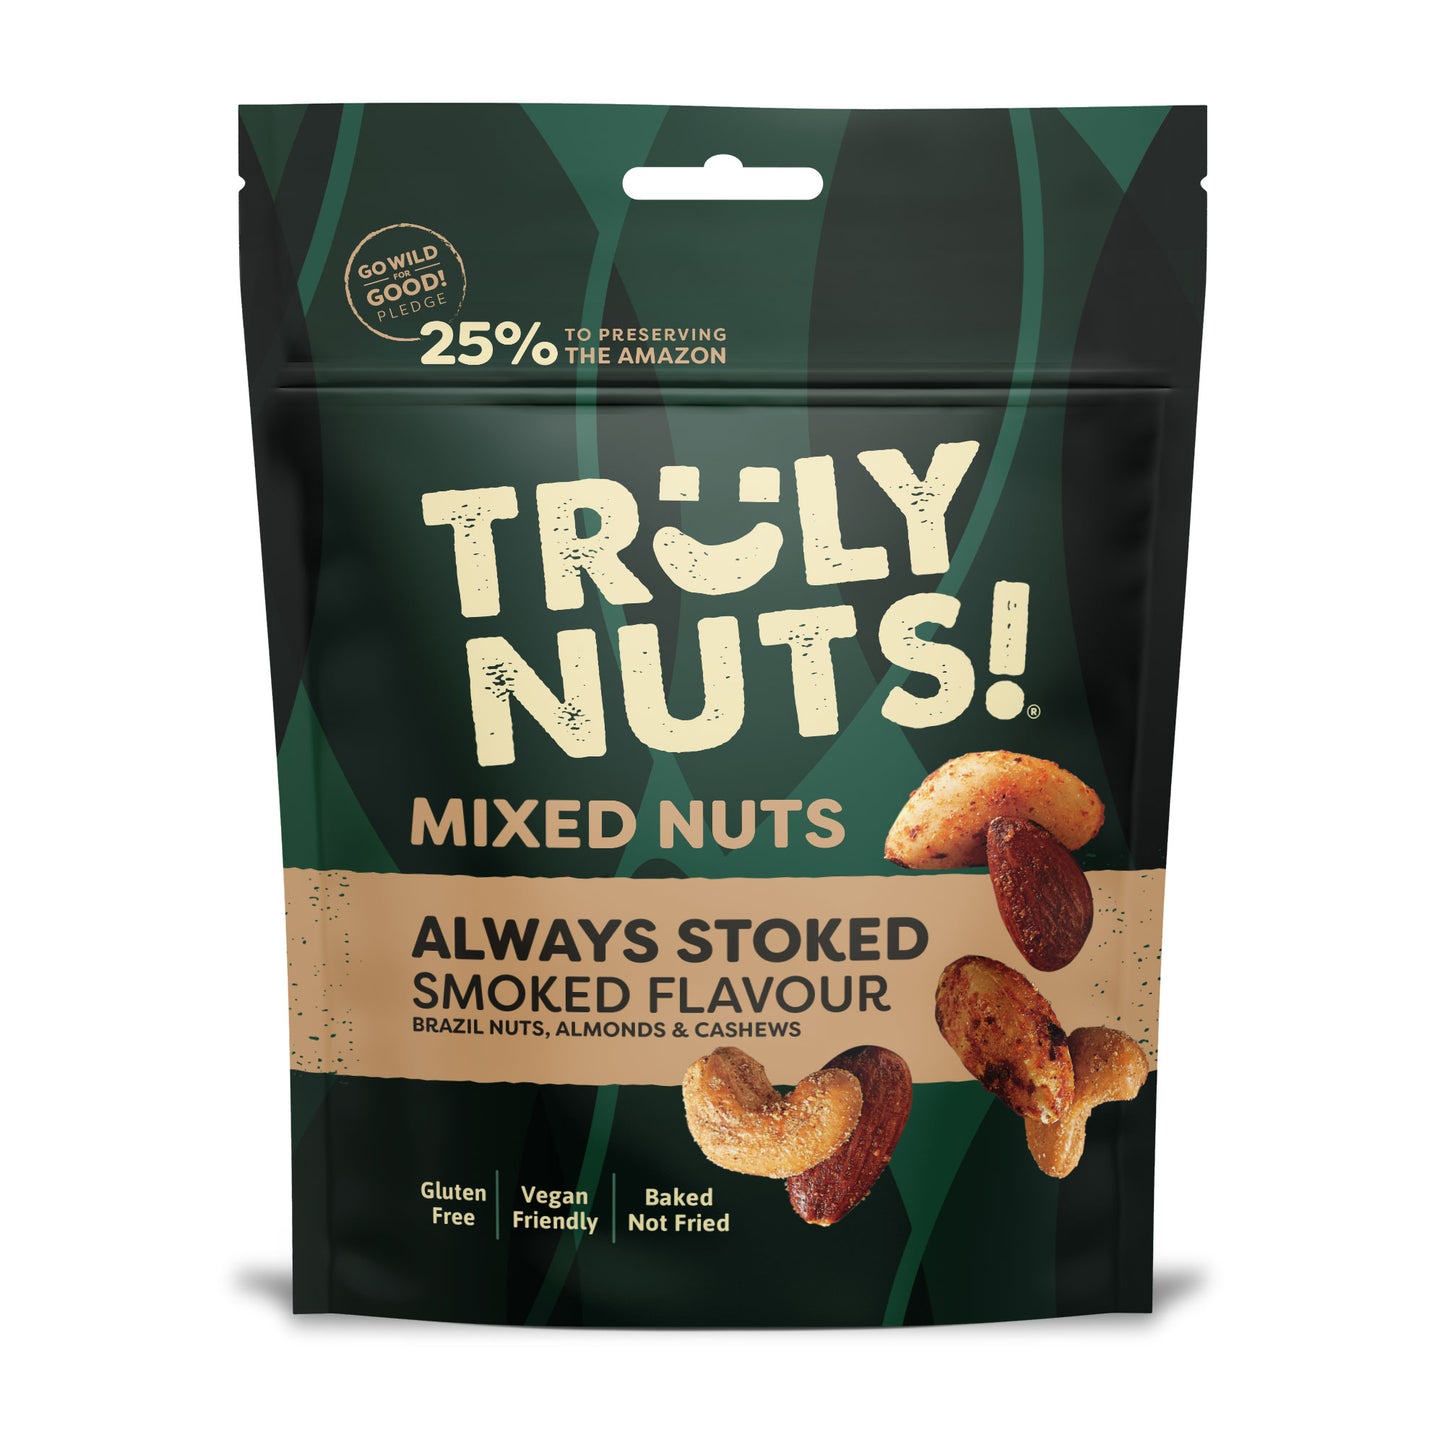 MIXED NUTS - Smoked Flavour